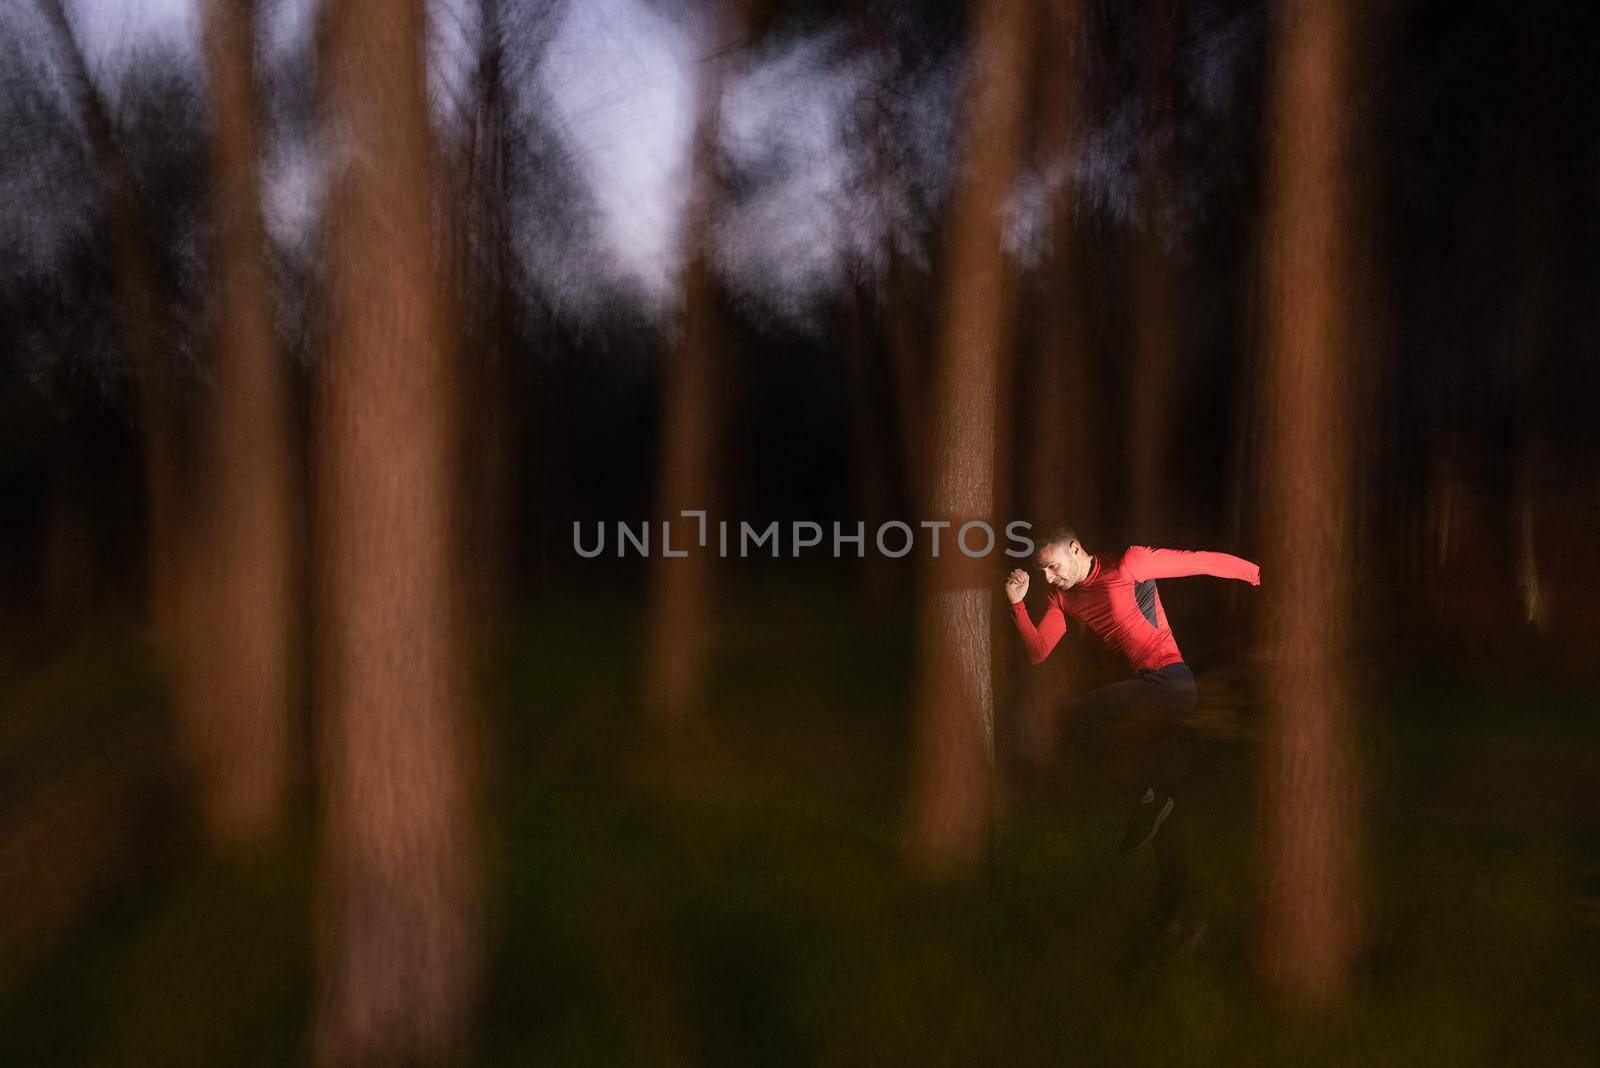 Man running through the trees on a blurred motion of forest by ivanmoreno